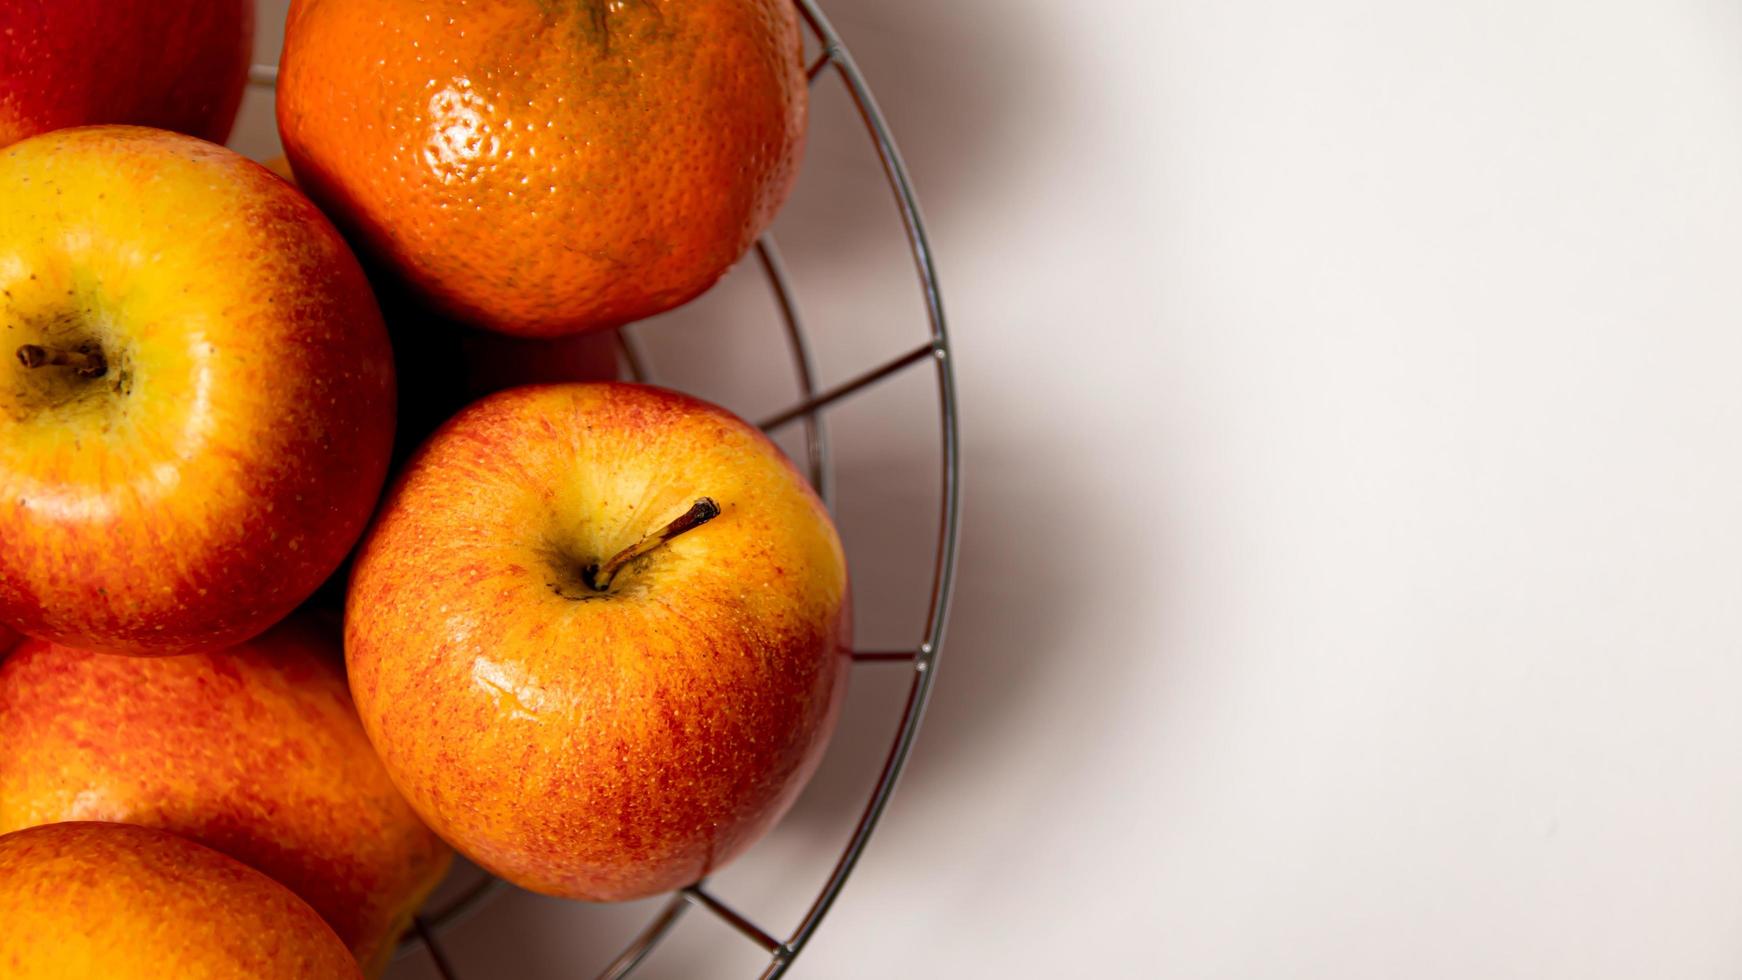 Ripe apples and tangerines in a metal basket on a white background photo